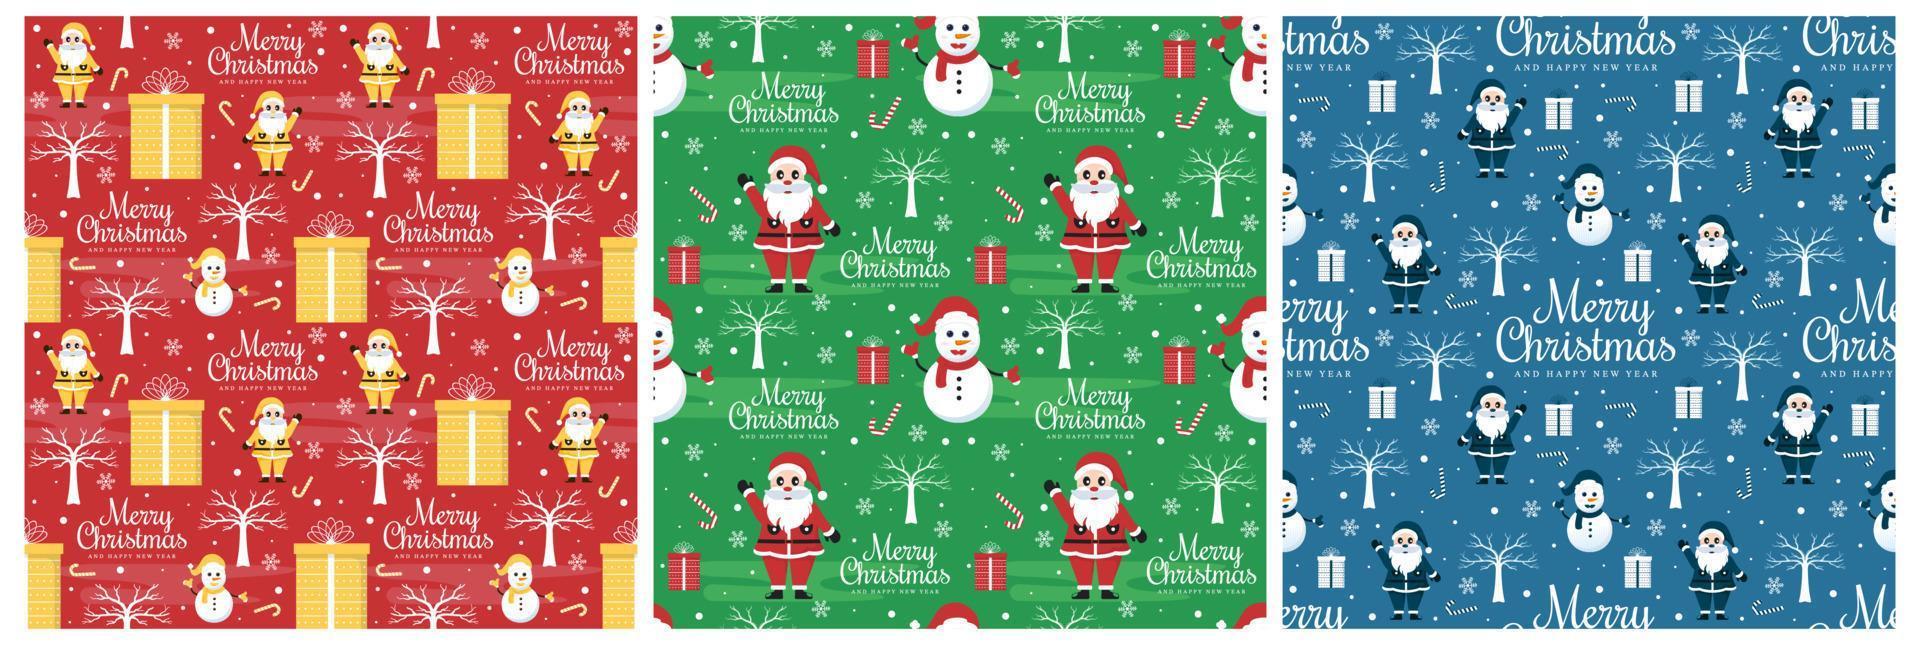 Set of Christmas Background Seamless Pattern Design With Santa Claus, Tree, Snowman And Gifts in Template Hand Drawn Cartoon Flat Illustration vector